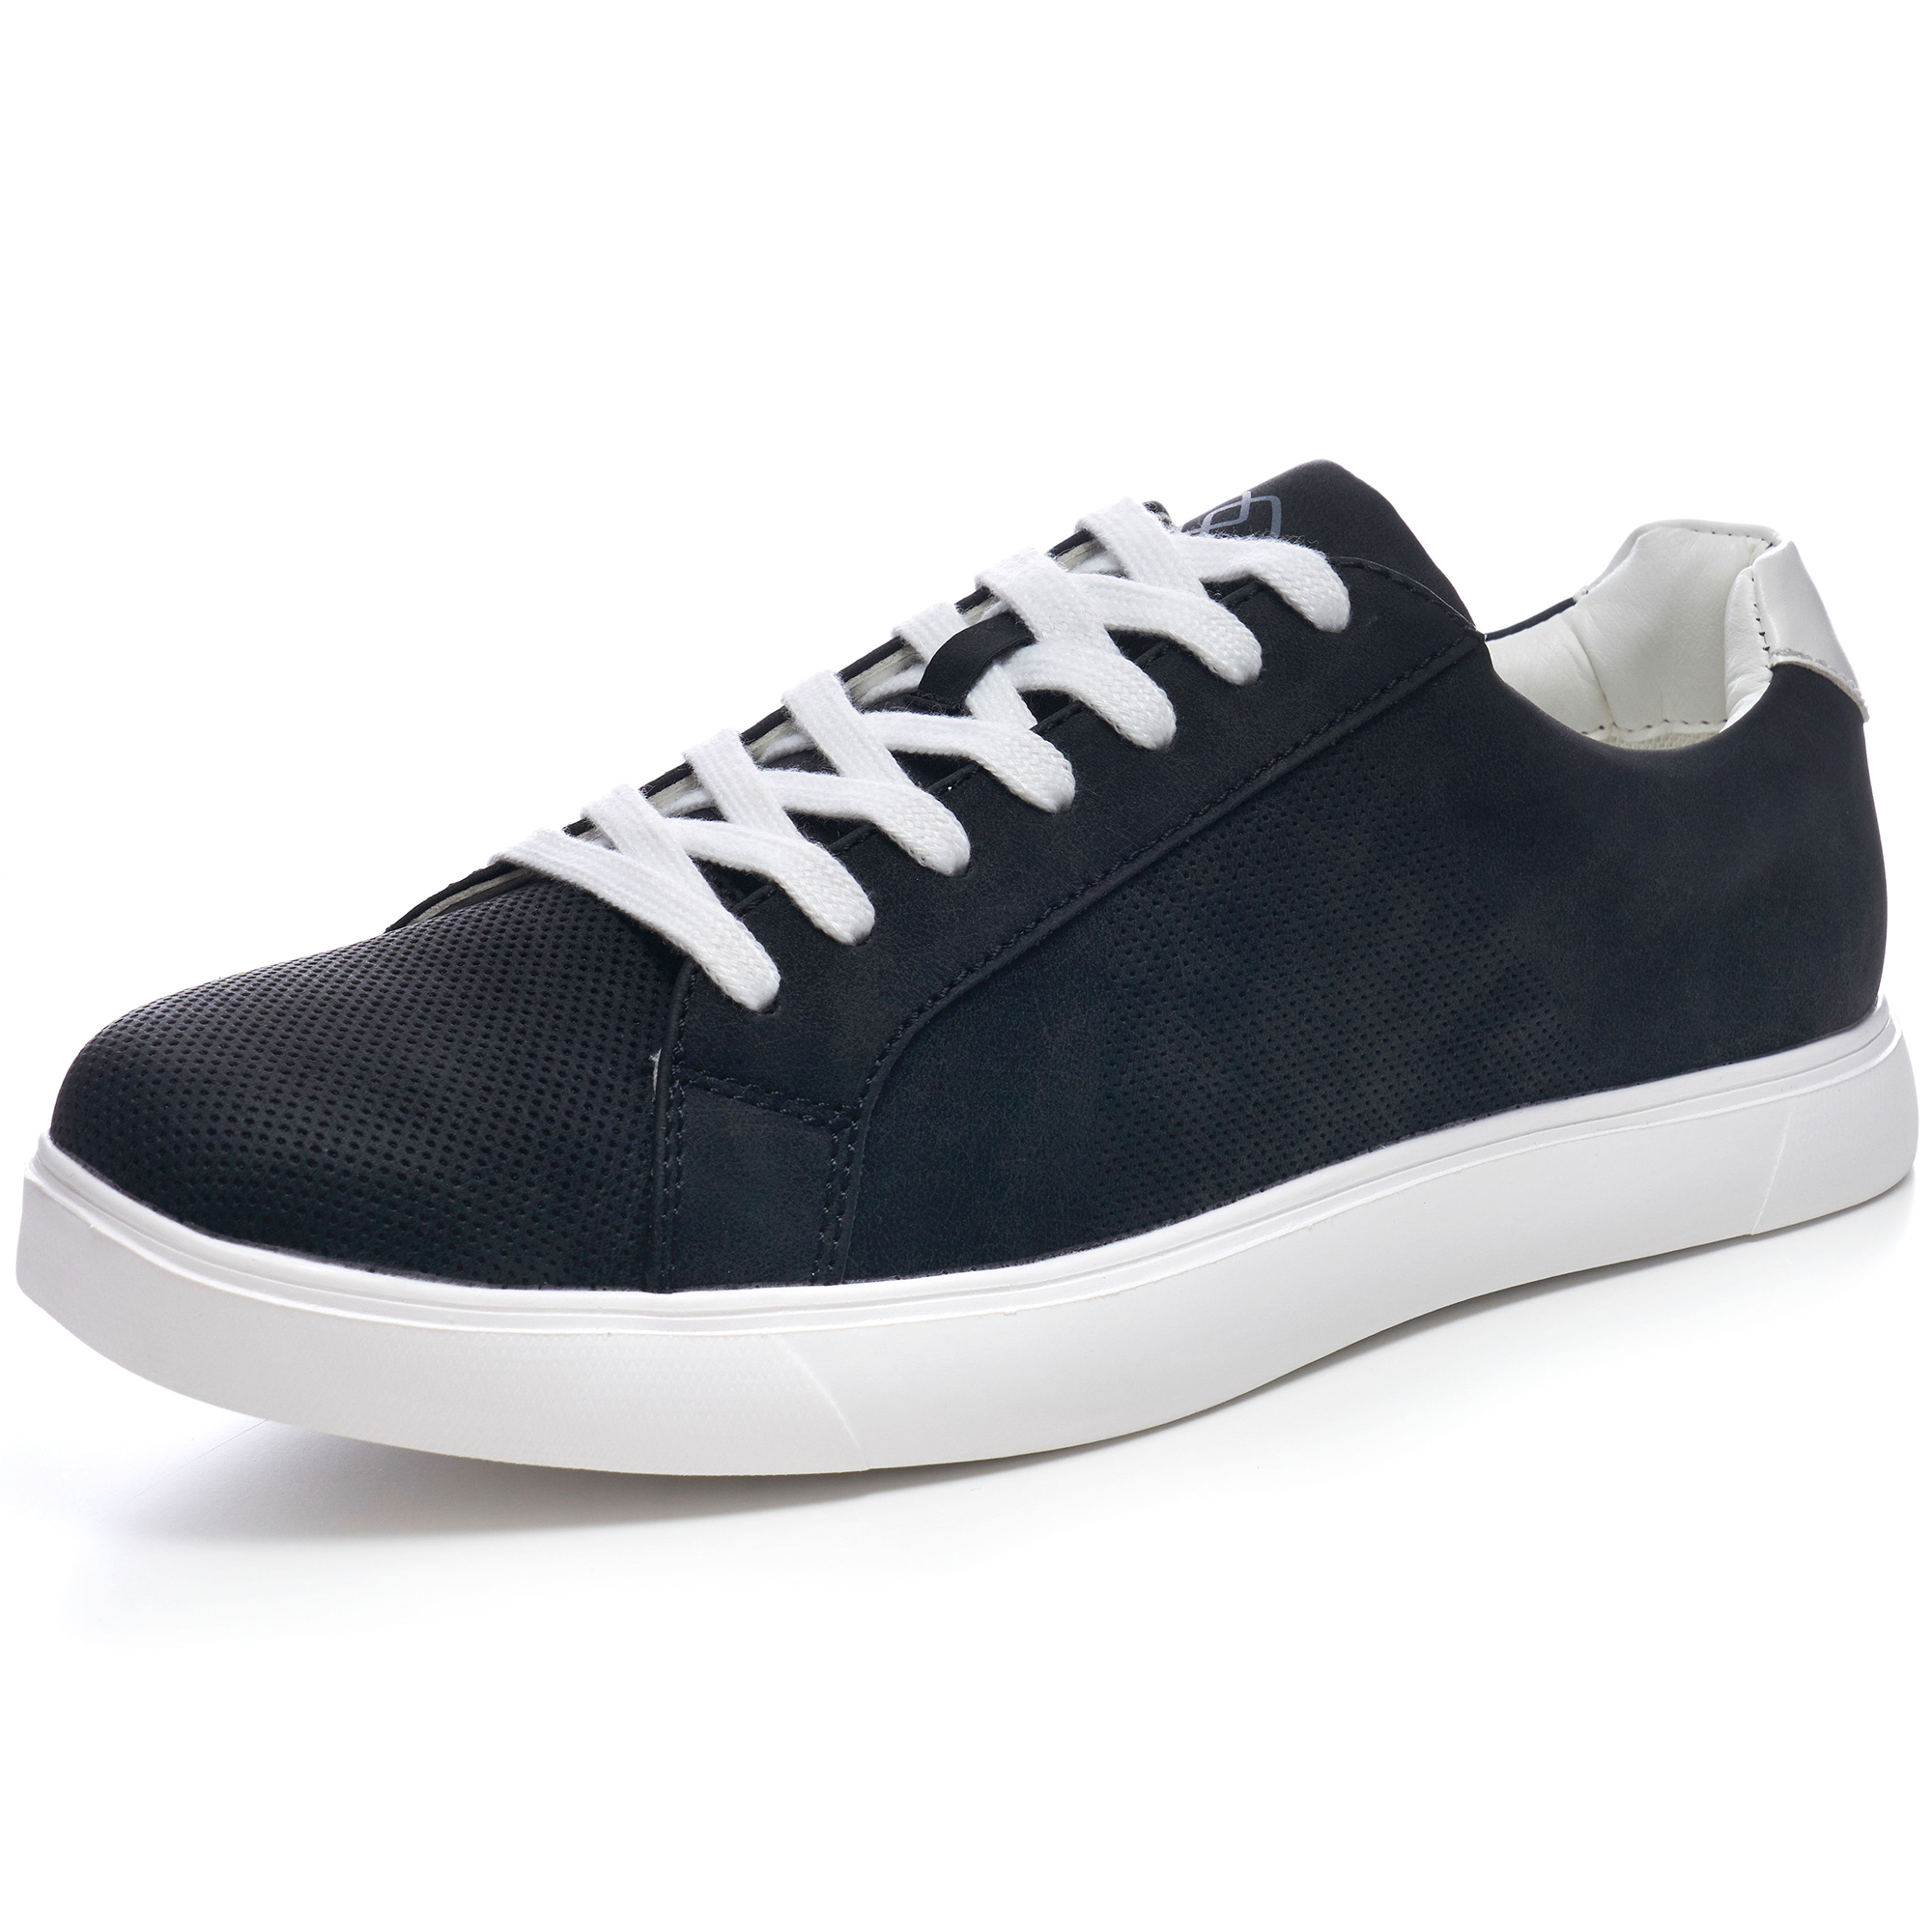 Alpine Swiss Ben Mens Smart Casual Shoes Low Top Sneakers Lace Up Tennis Shoes - image 1 of 5